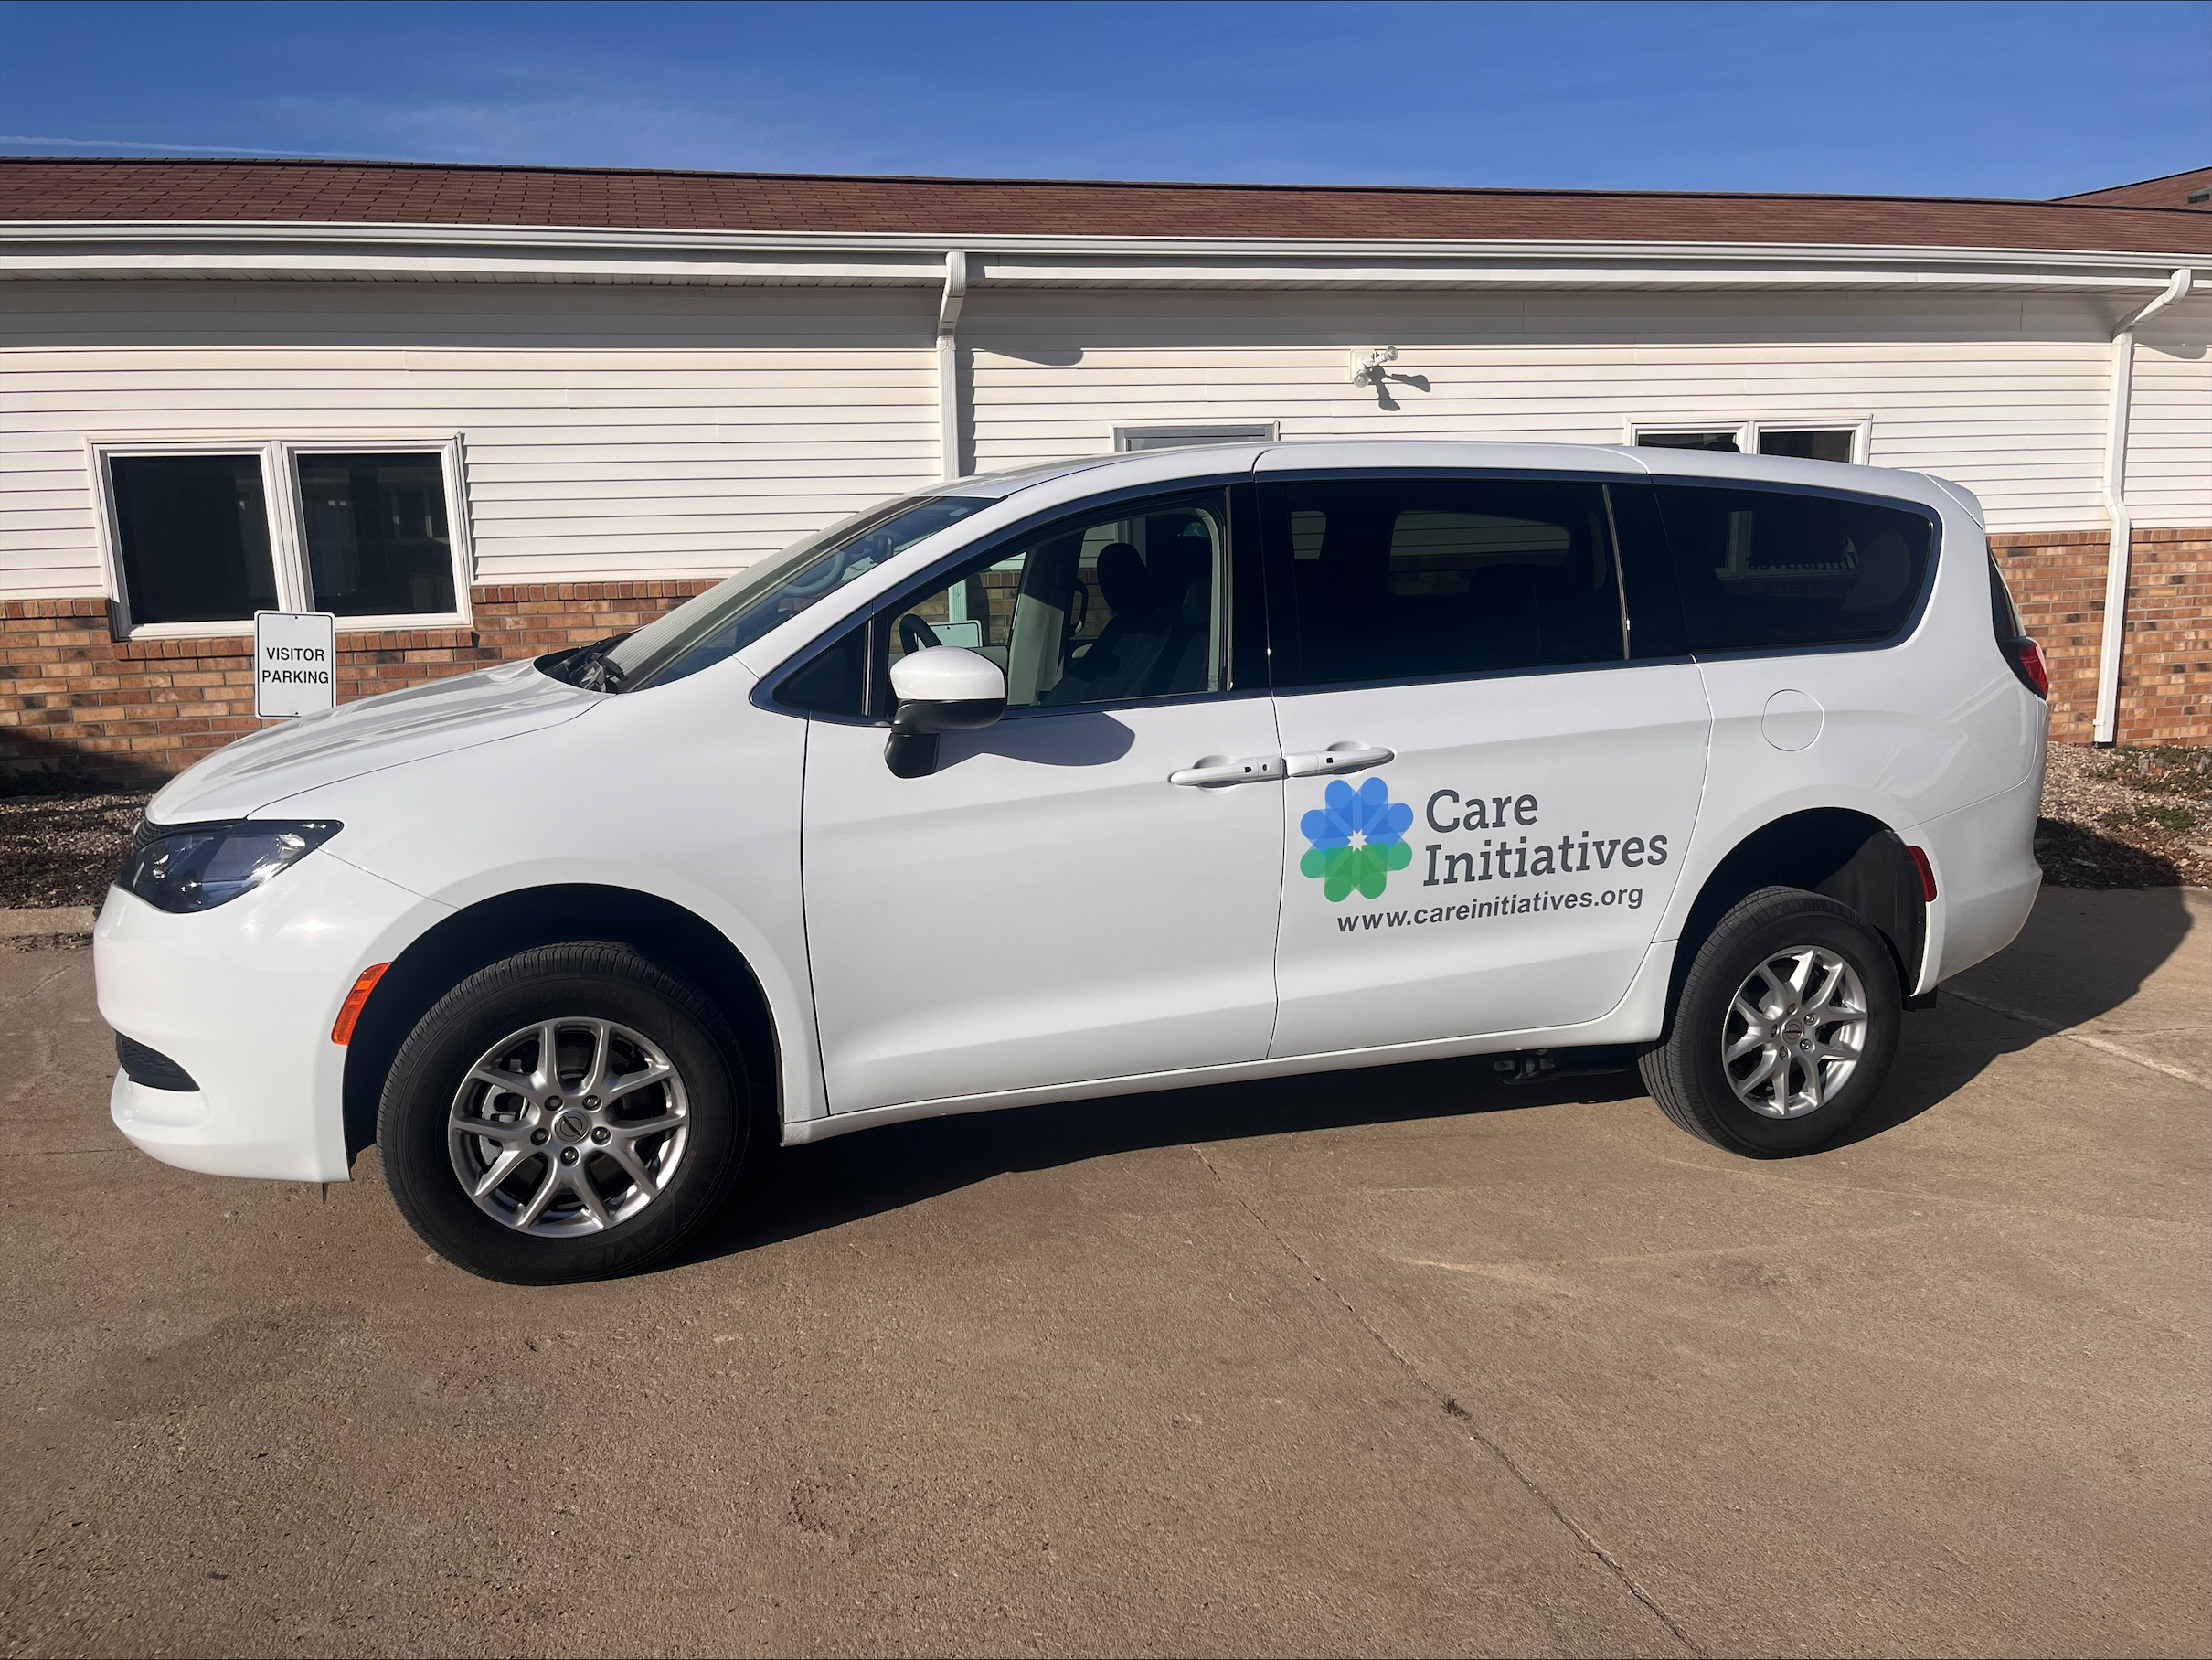 The new Care Initiatives vans are equipped with a ramp for access by individuals who use a wheelchair or other walking device and provide necessary safety restraints for all passengers.